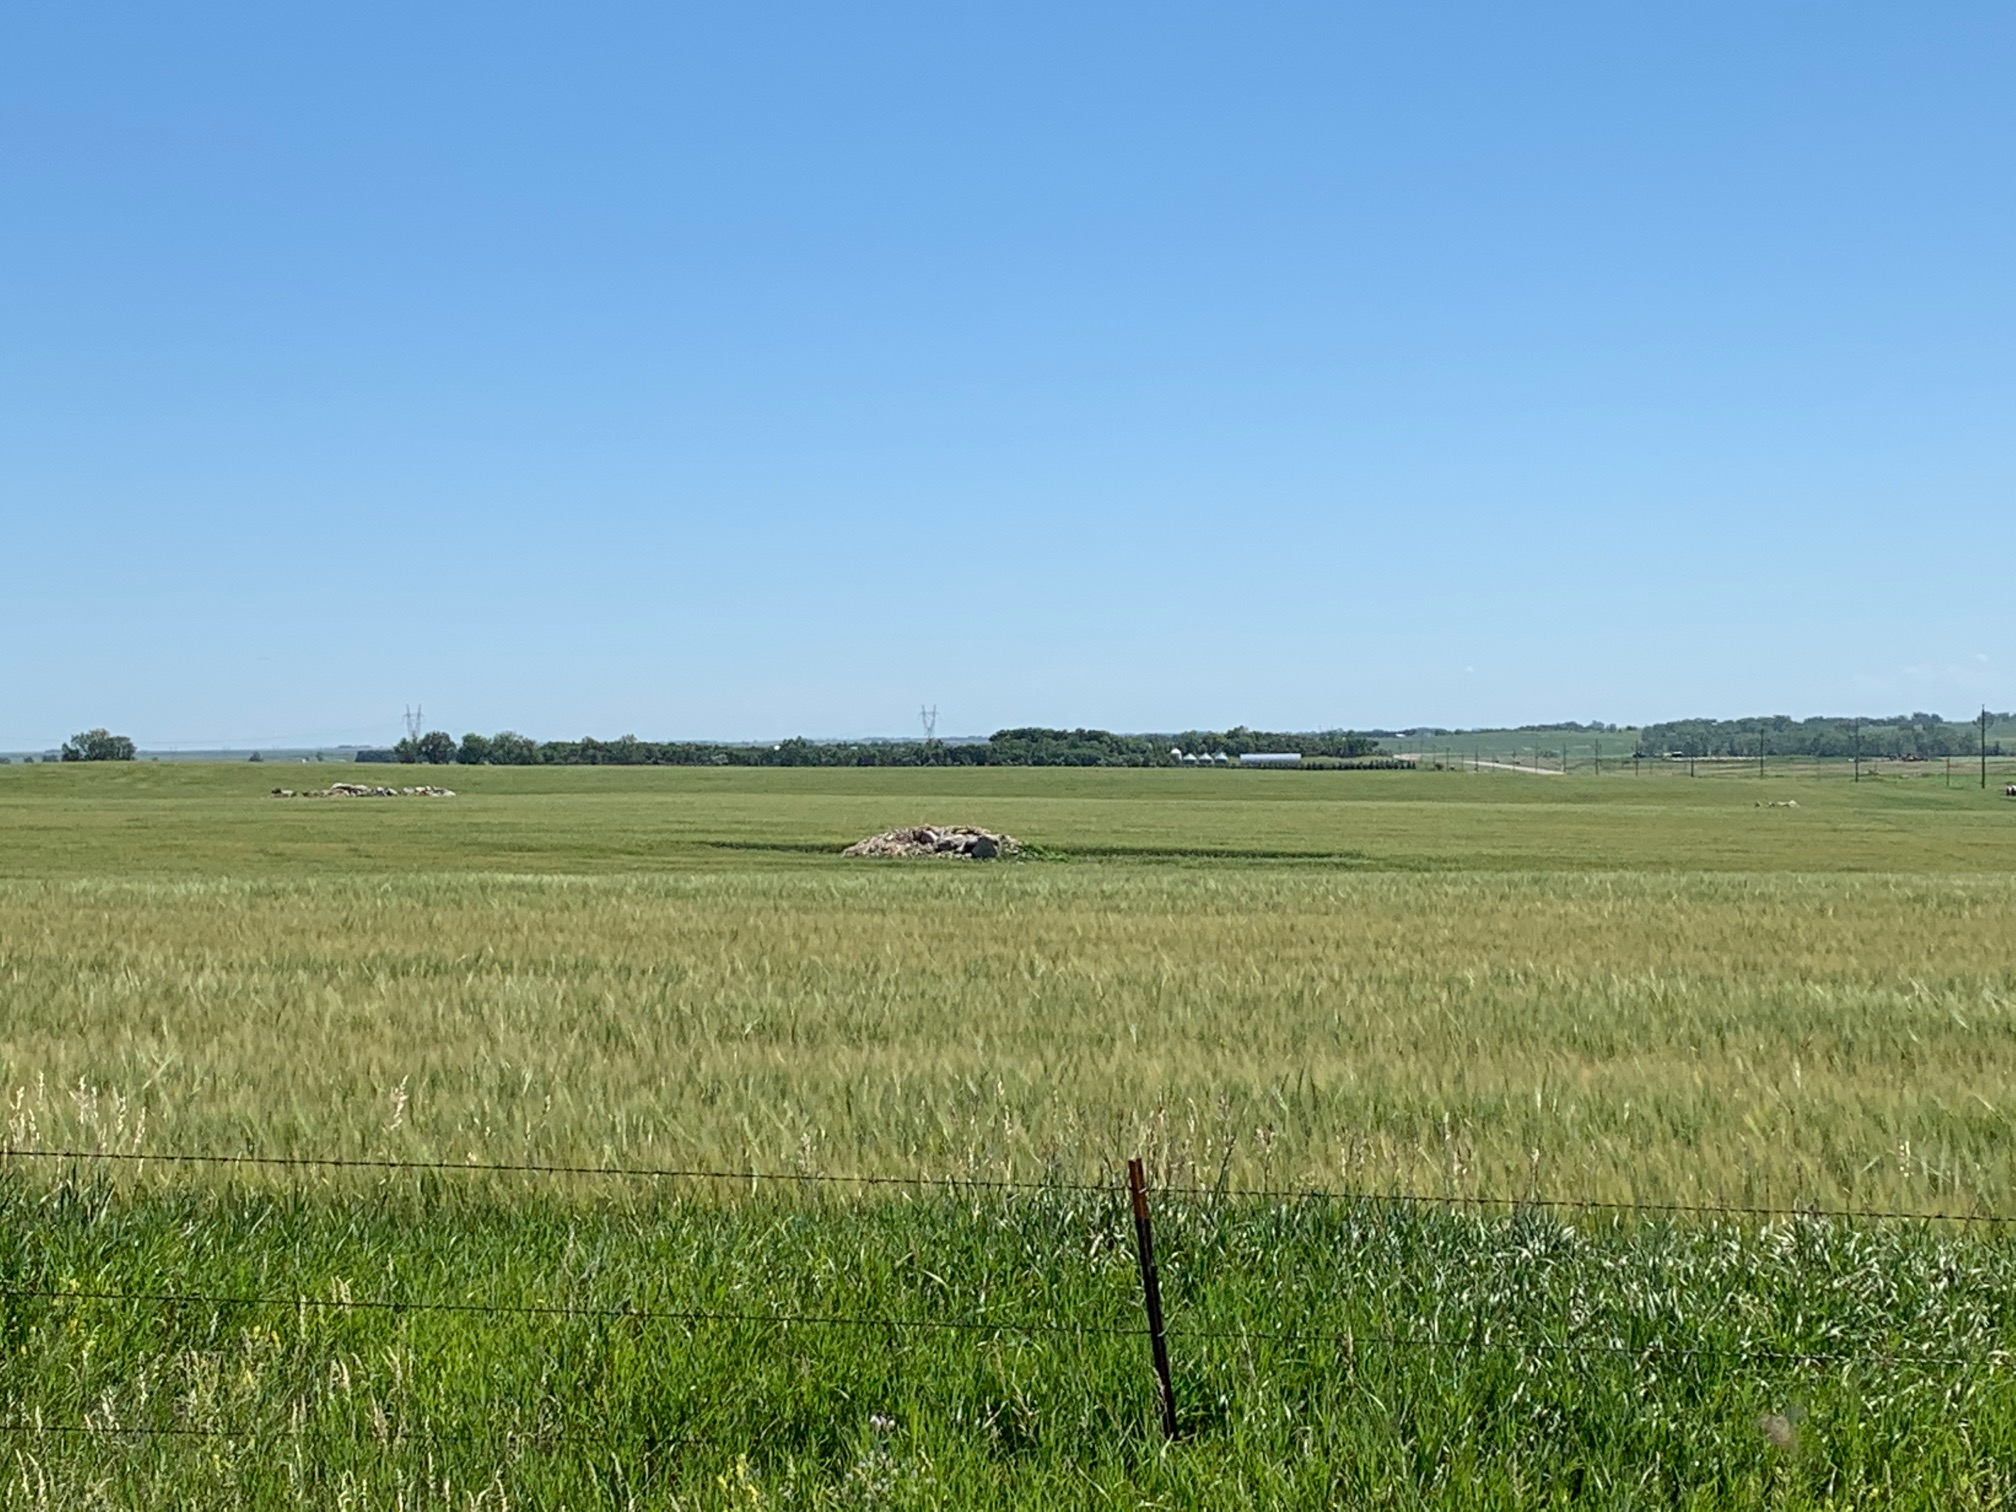 Afternoon Ag News, June 30, 2021: Producers should be testing forages for nitrates